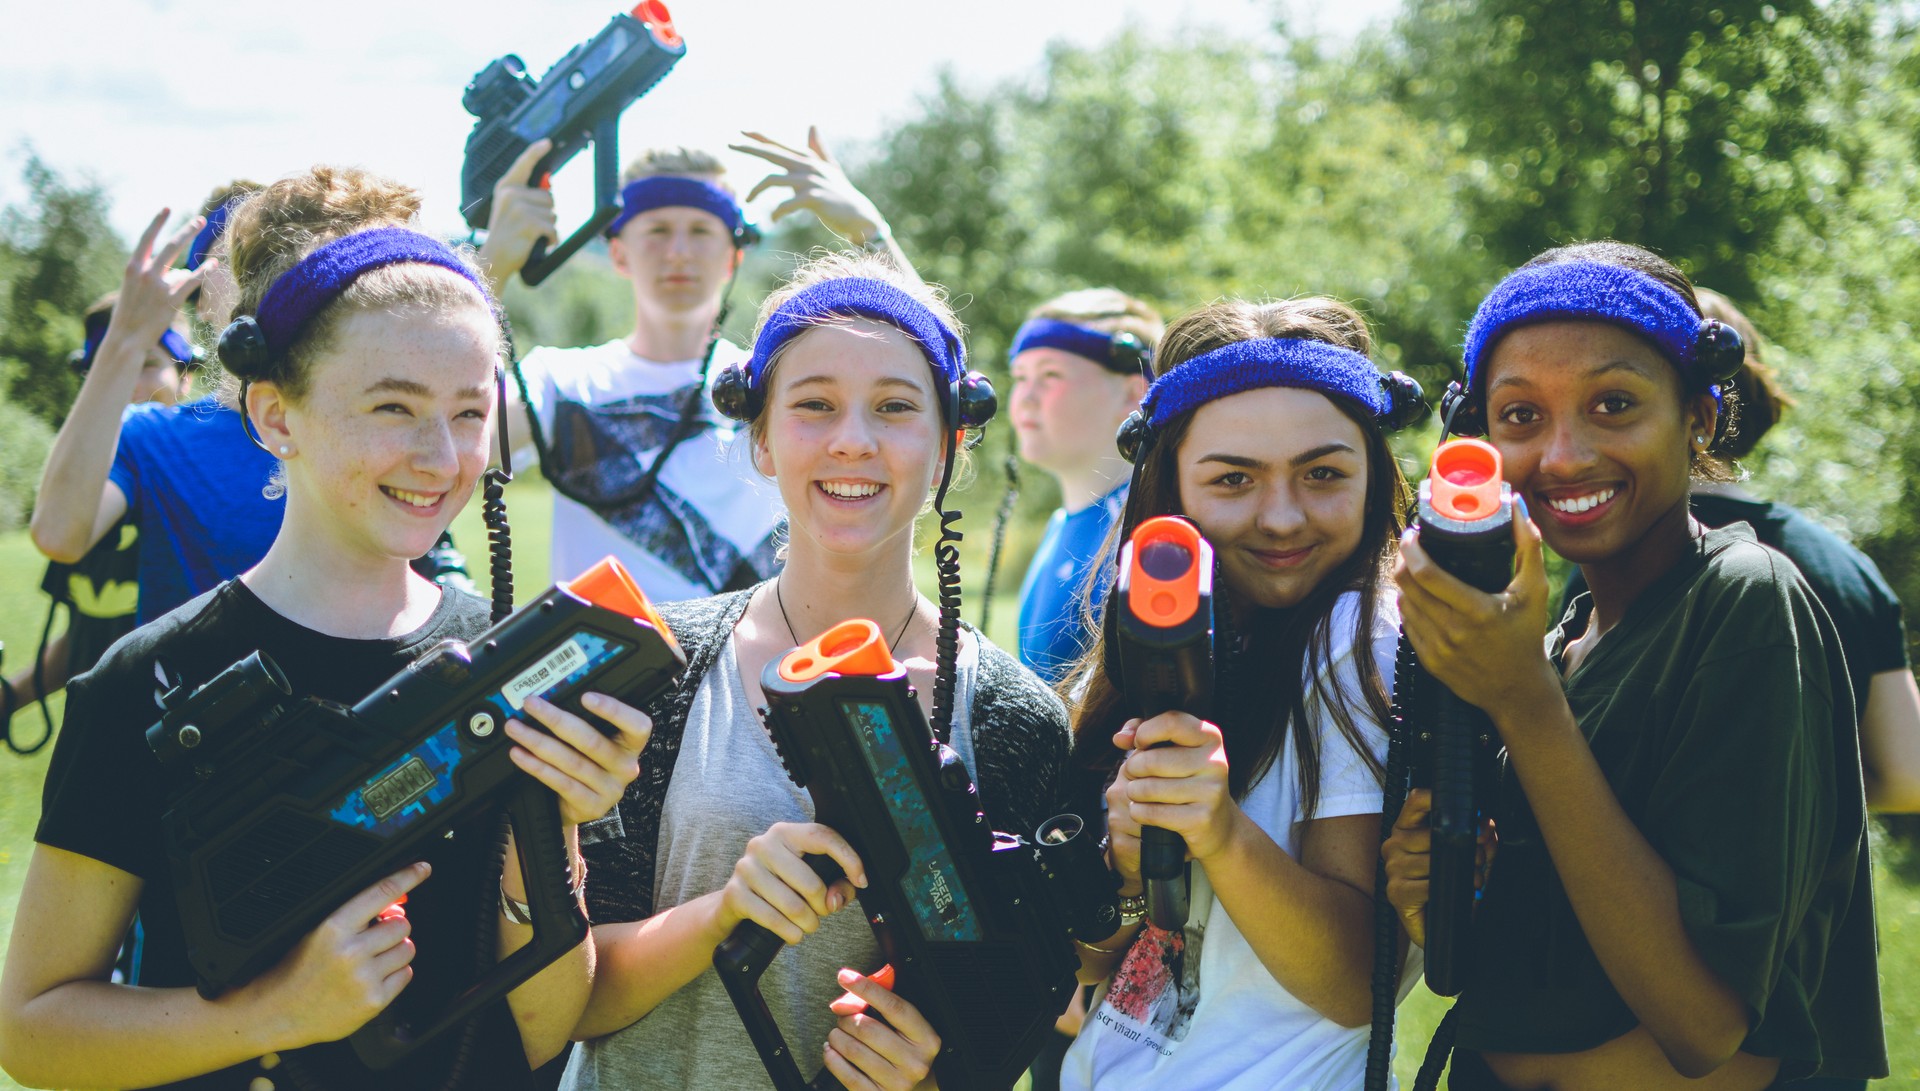 Campers smiling and holding laser tag gear